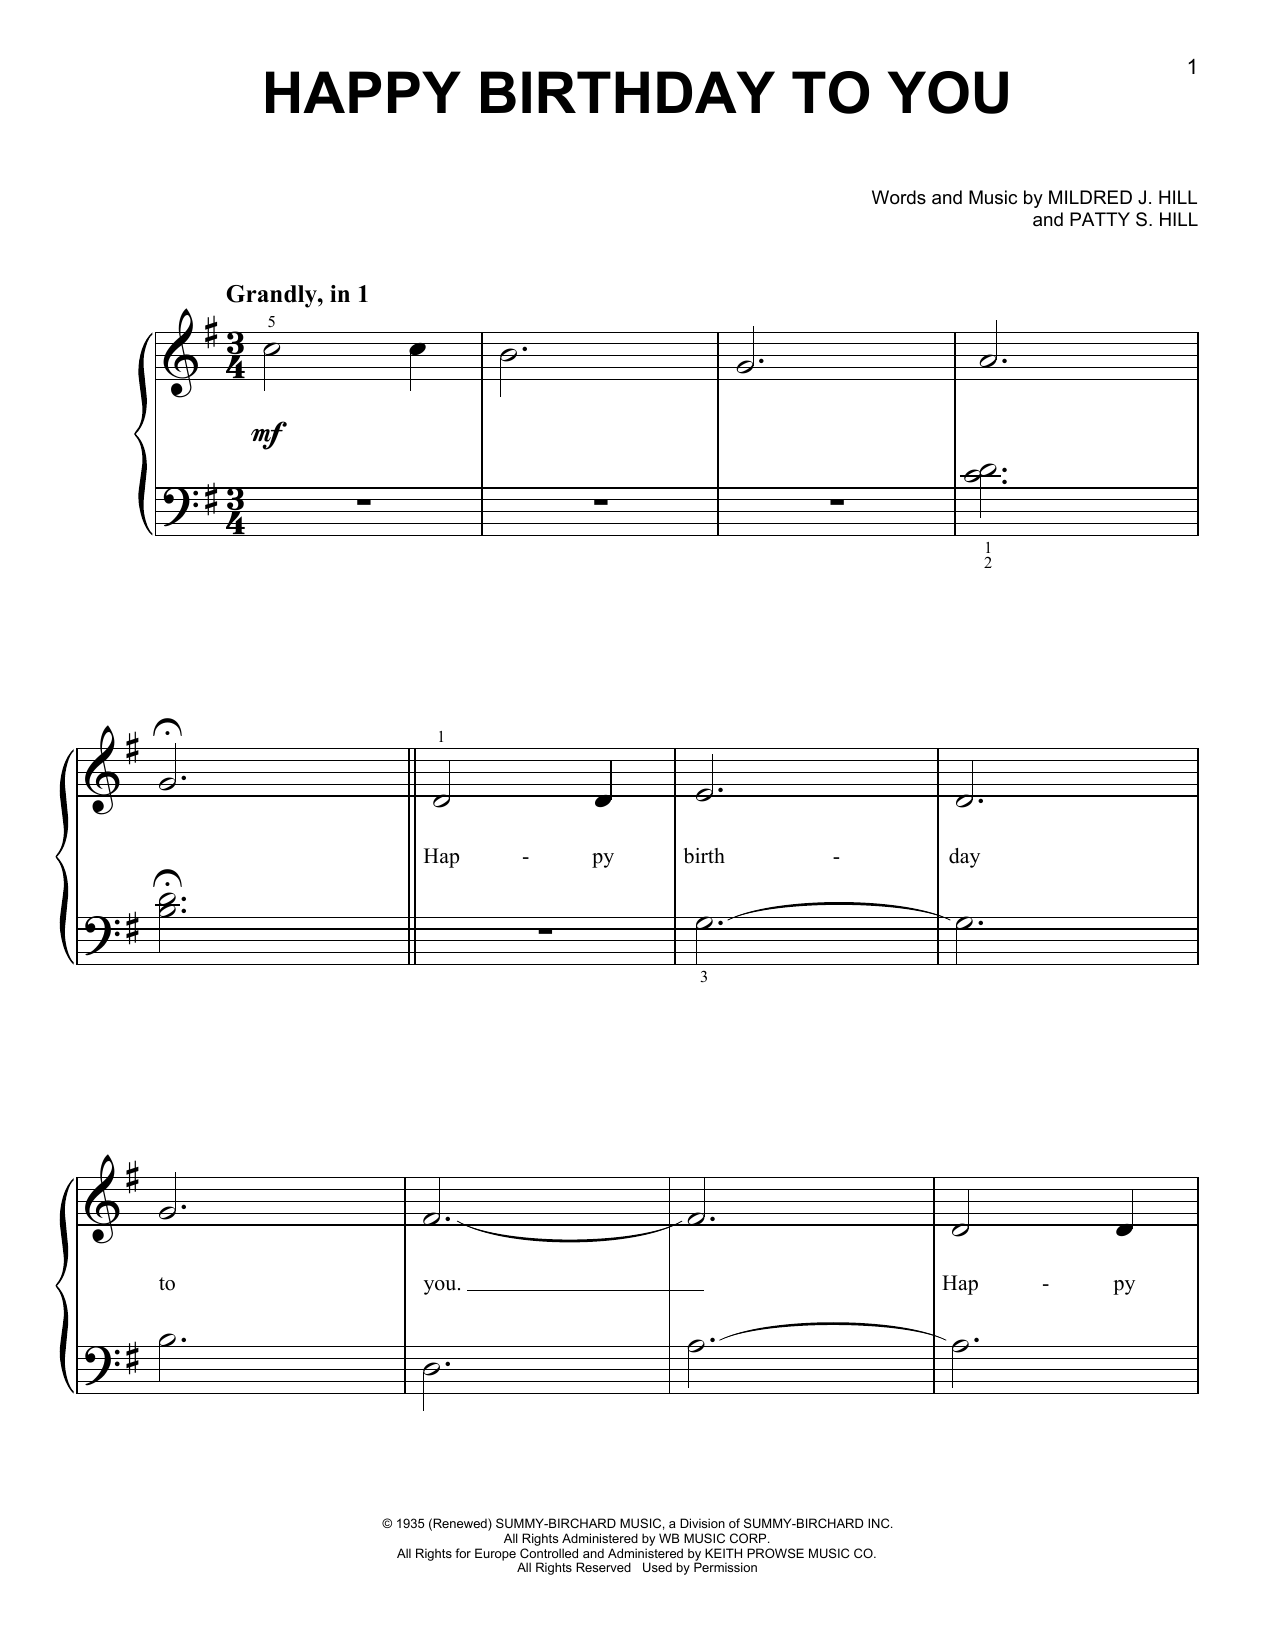 Download Mildred & Patty Hill Happy Birthday To You Sheet Music and Printable PDF Score for Harmonica